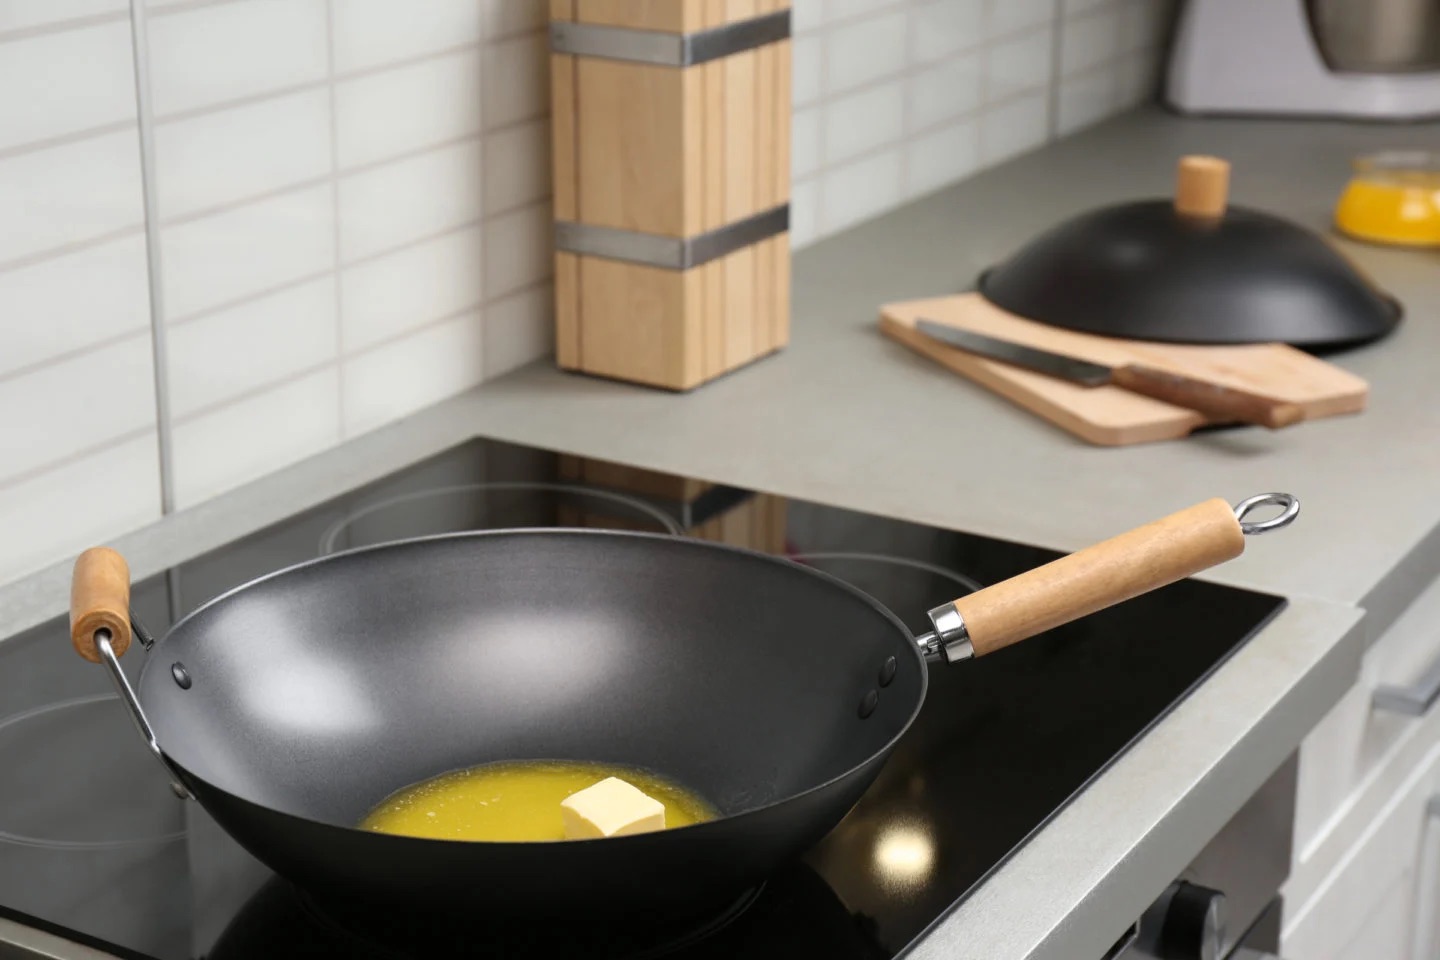 How To Use A Wok On A Glass Top Stove